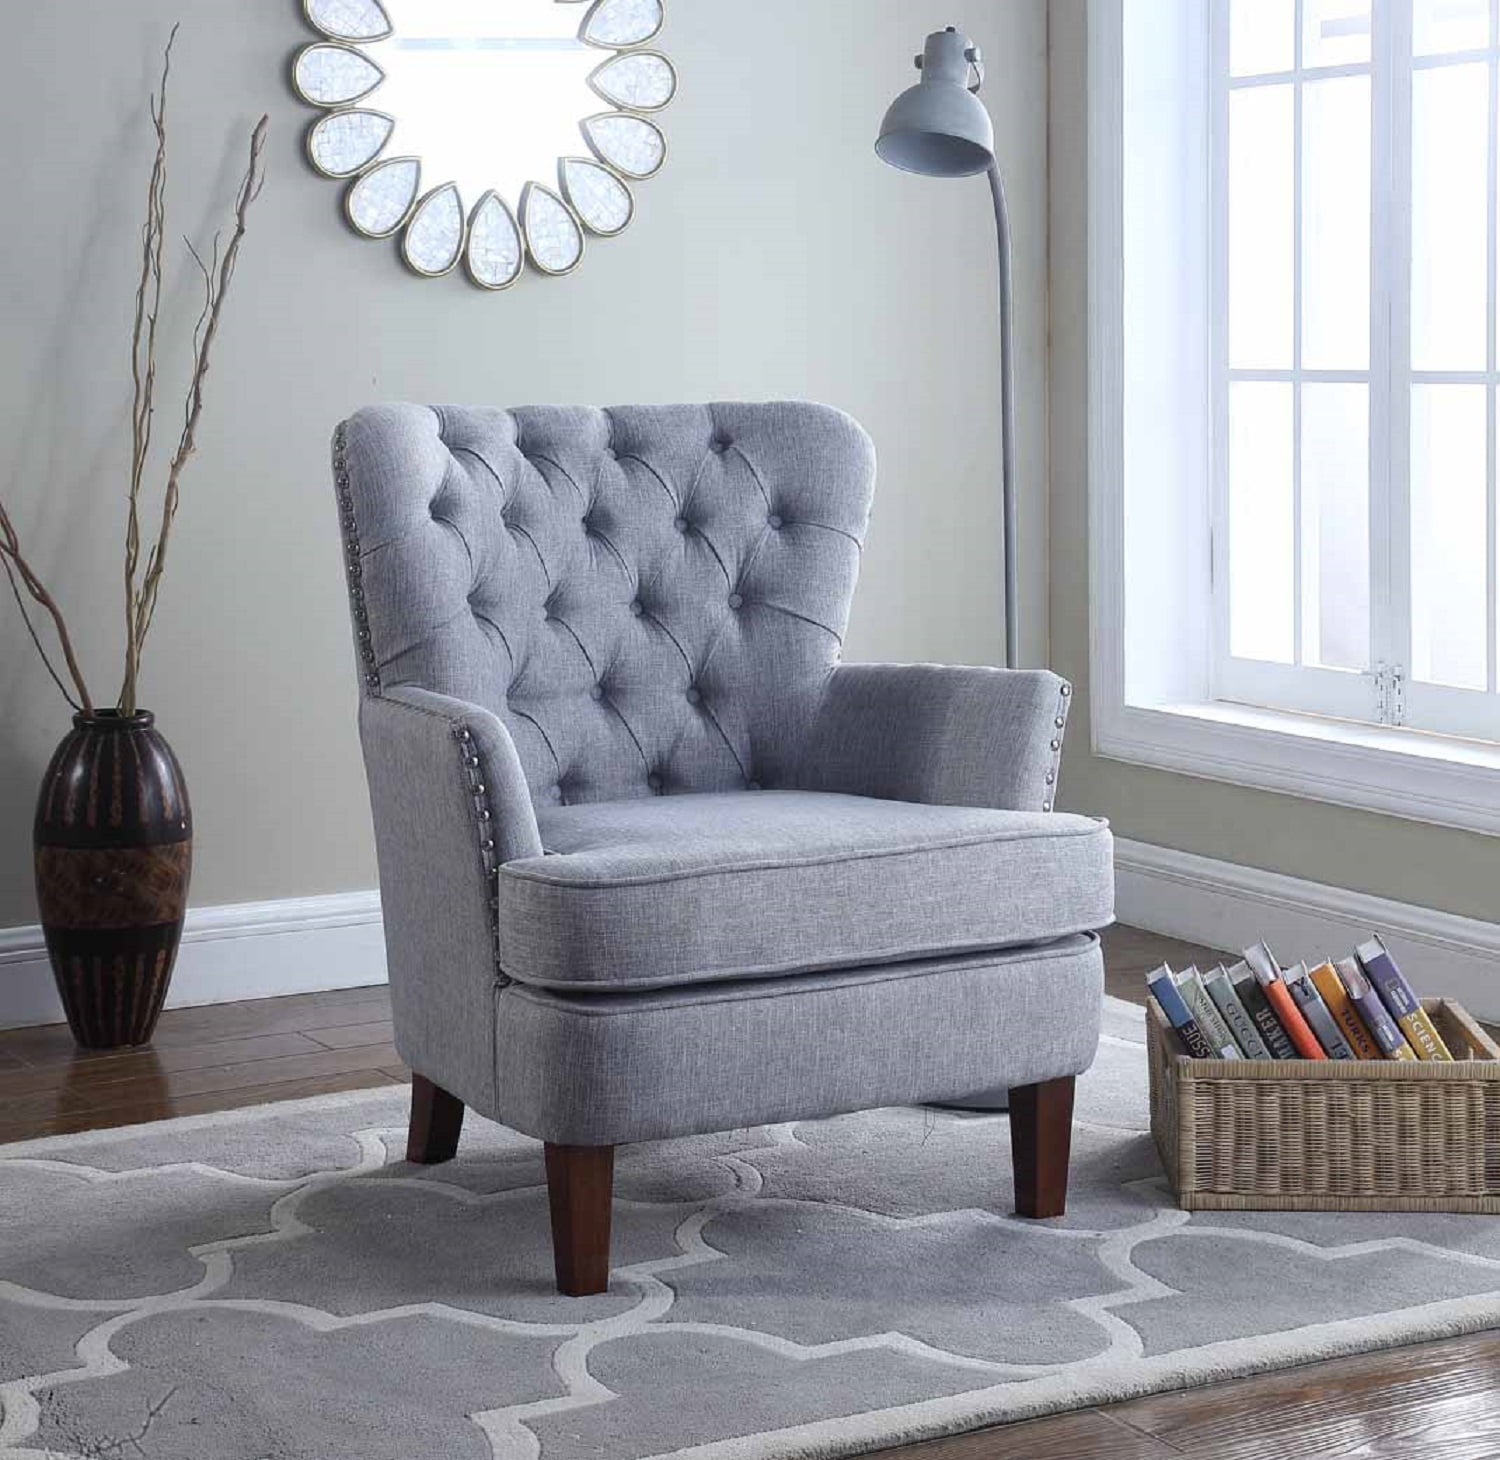 Button Tufted Accent Chair with Nailhead, Gray Color - Walmart.com